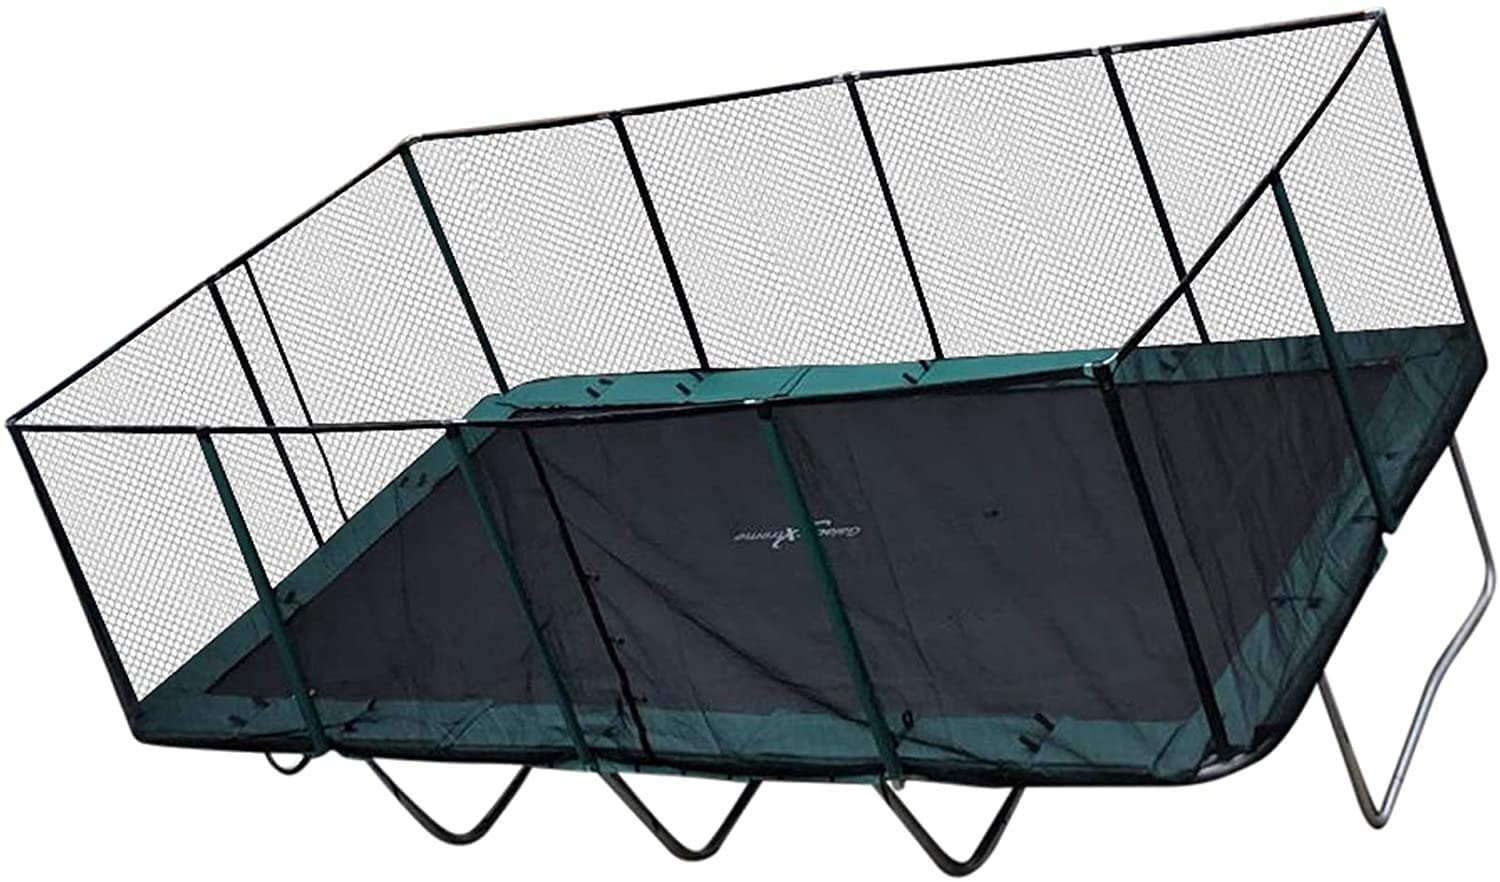 Happy Trampoline - Galactic Xtreme Gymnastic Rectangle Trampoline with Net Enclosure